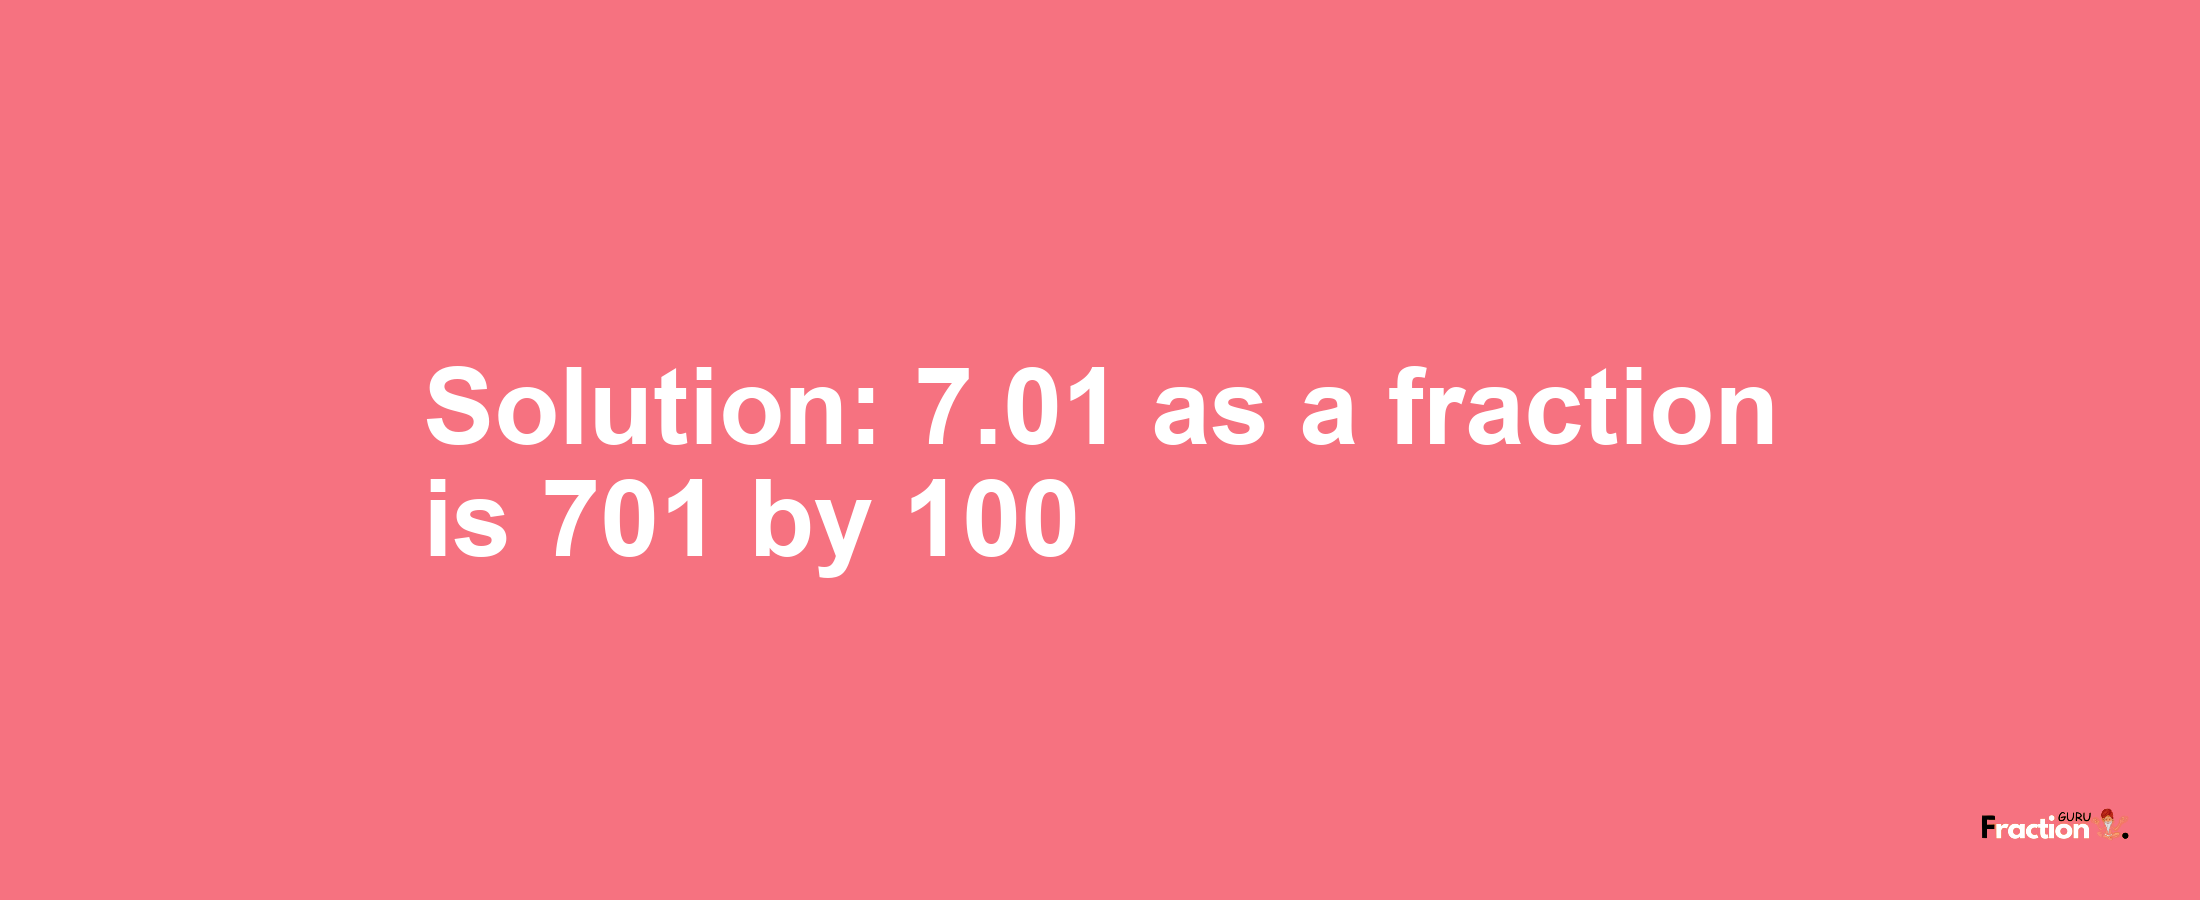 Solution:7.01 as a fraction is 701/100